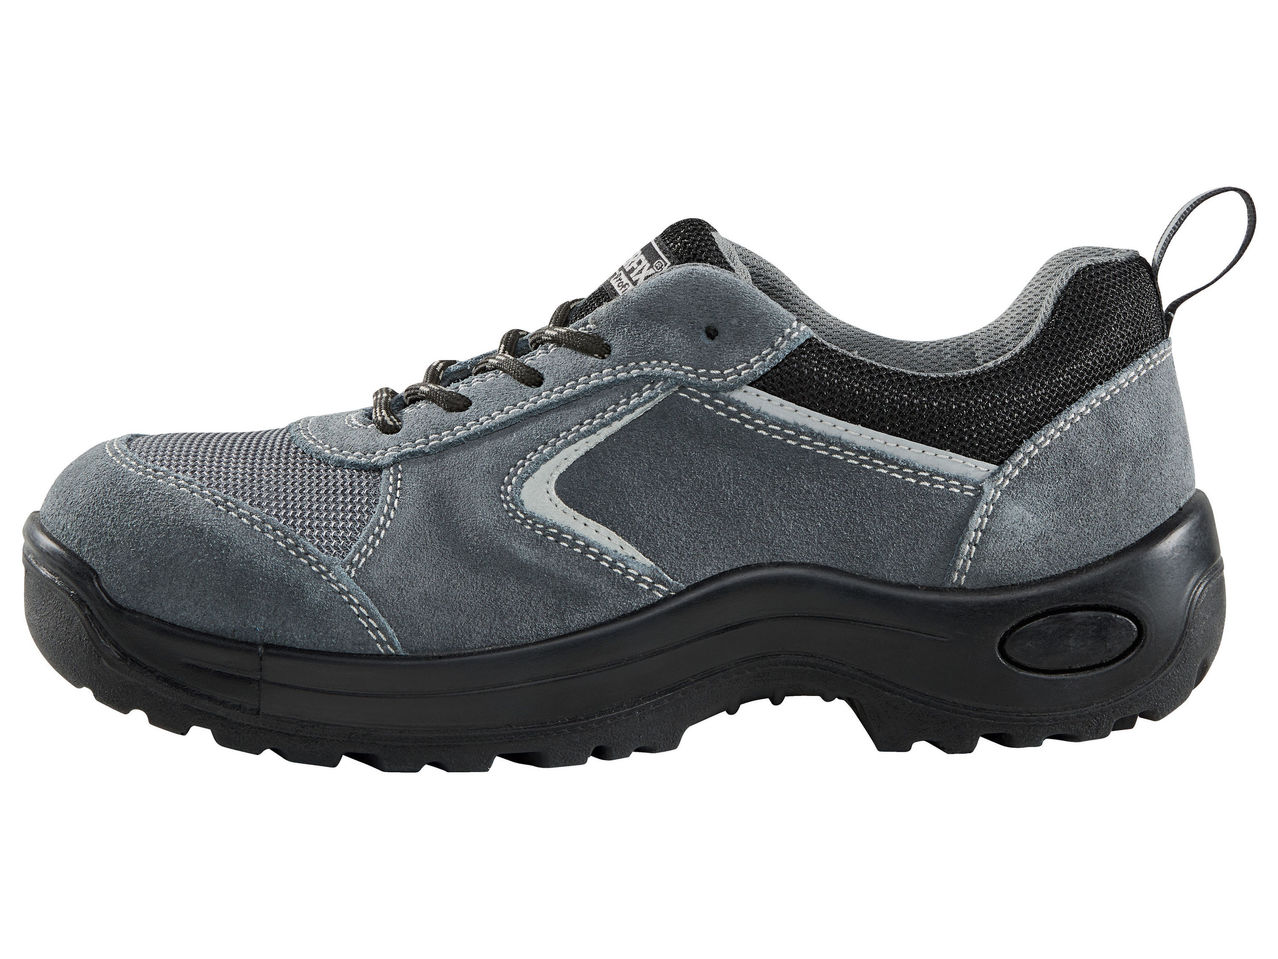 Men's Safety Shoes